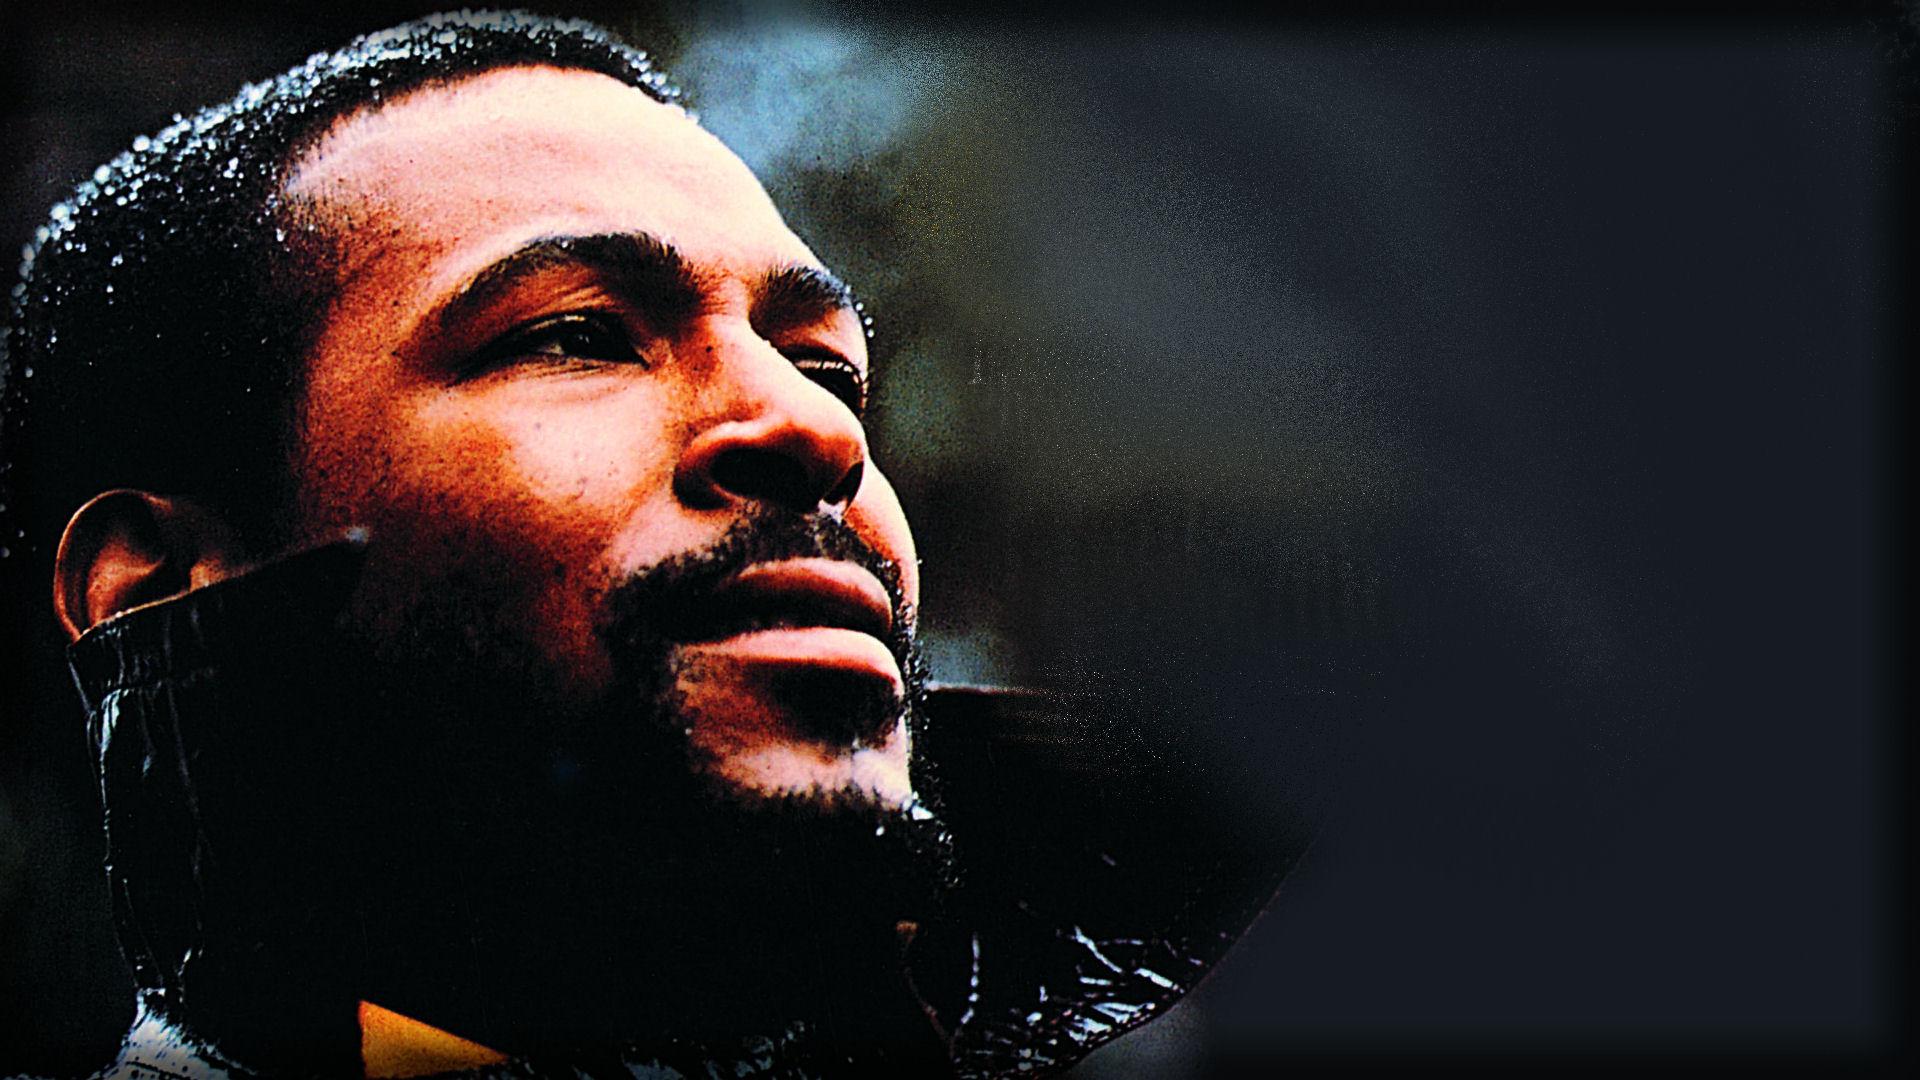 Marvin Gaye image Marvin Gaye HD wallpapers and backgrounds photos.